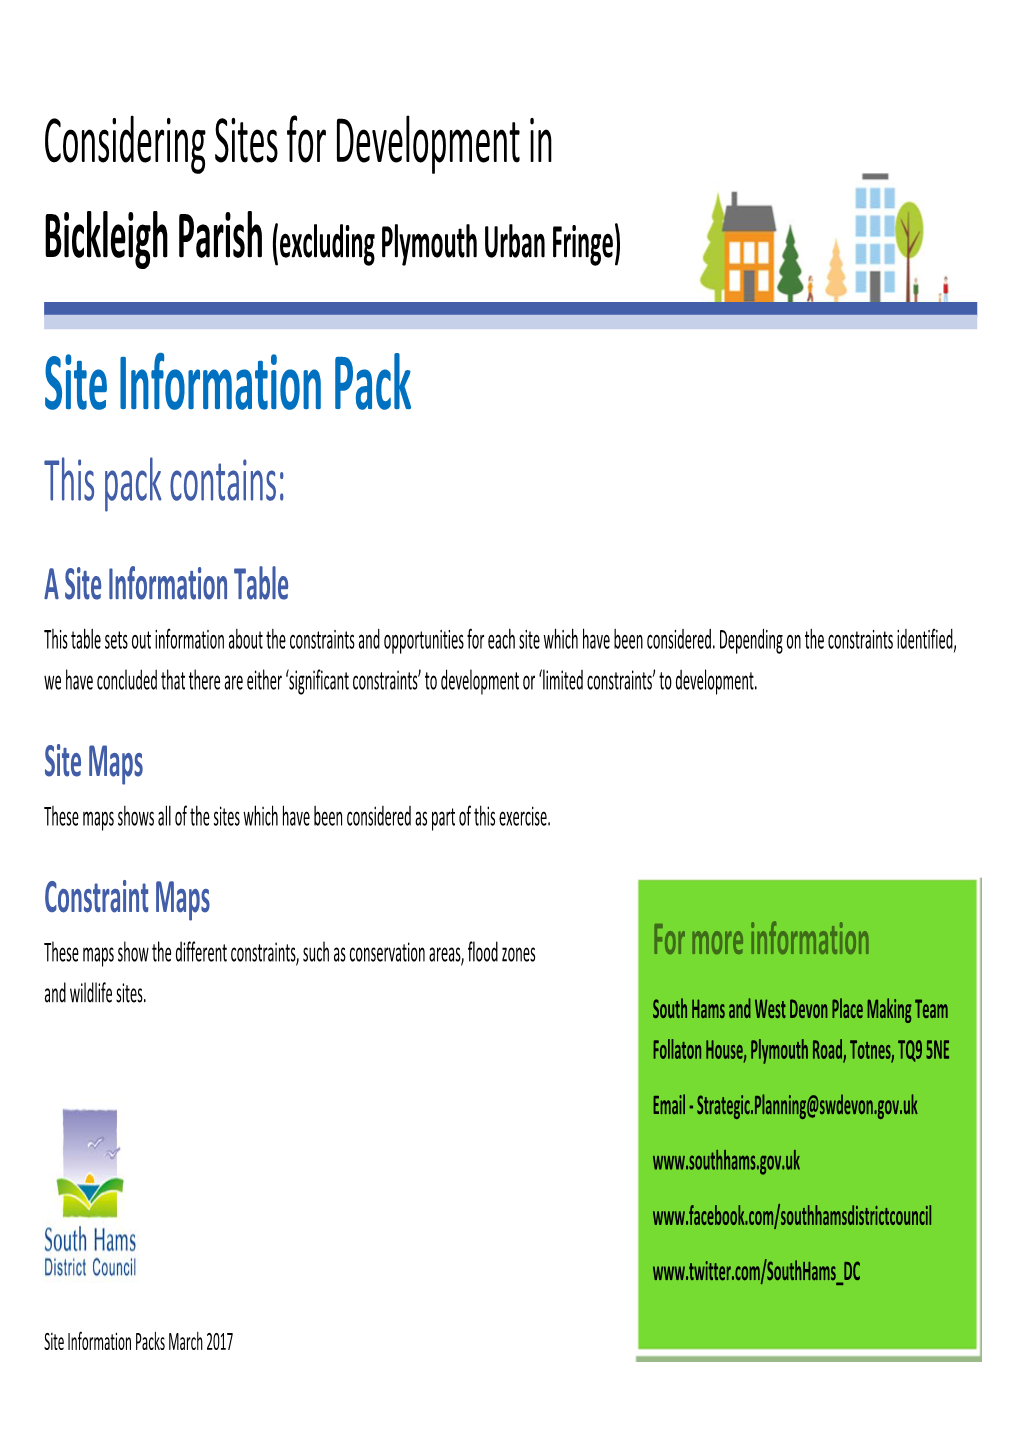 Site Information Pack